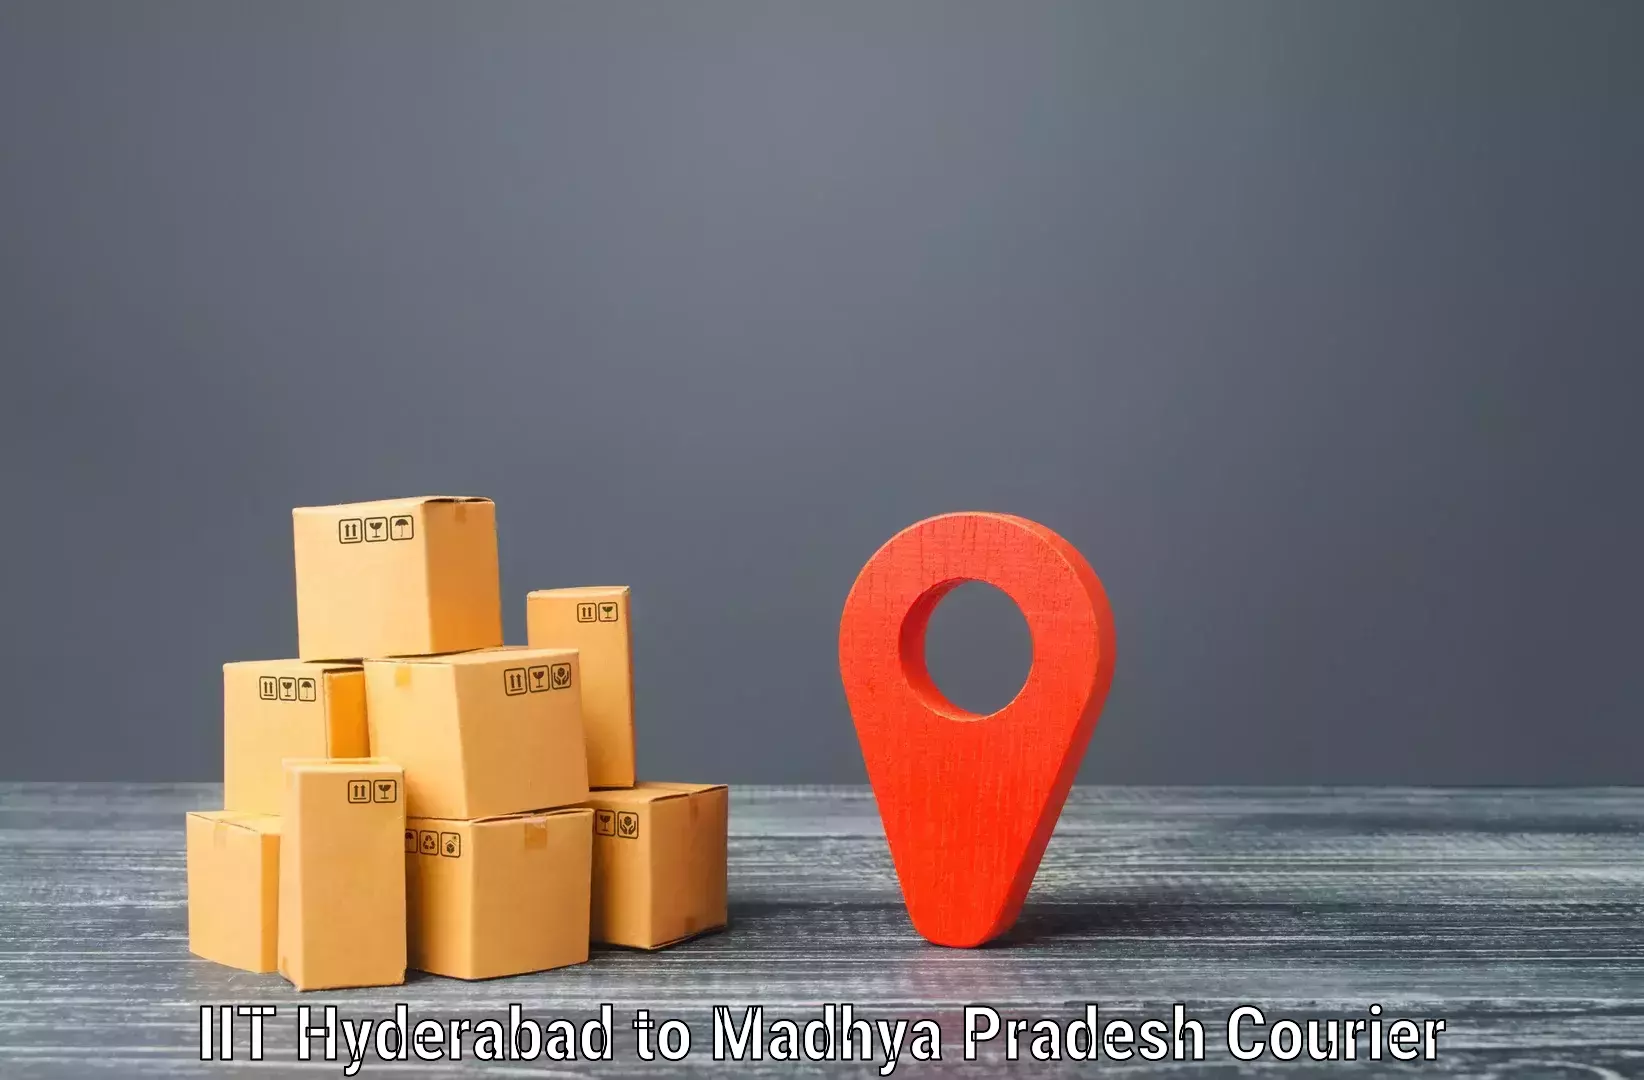 Round-the-clock parcel delivery IIT Hyderabad to Indore